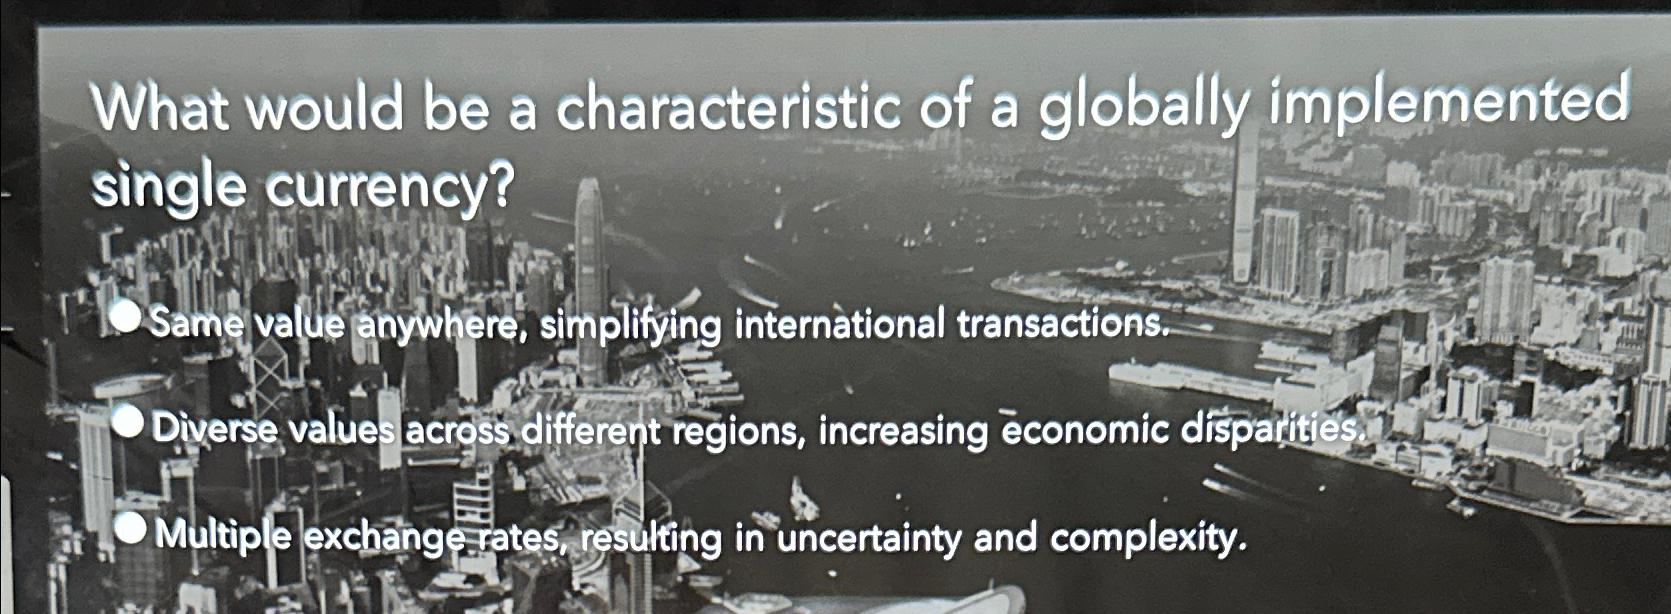 What would be a characteristic of a globally implemented single currency? Same value anywhere, simplifying